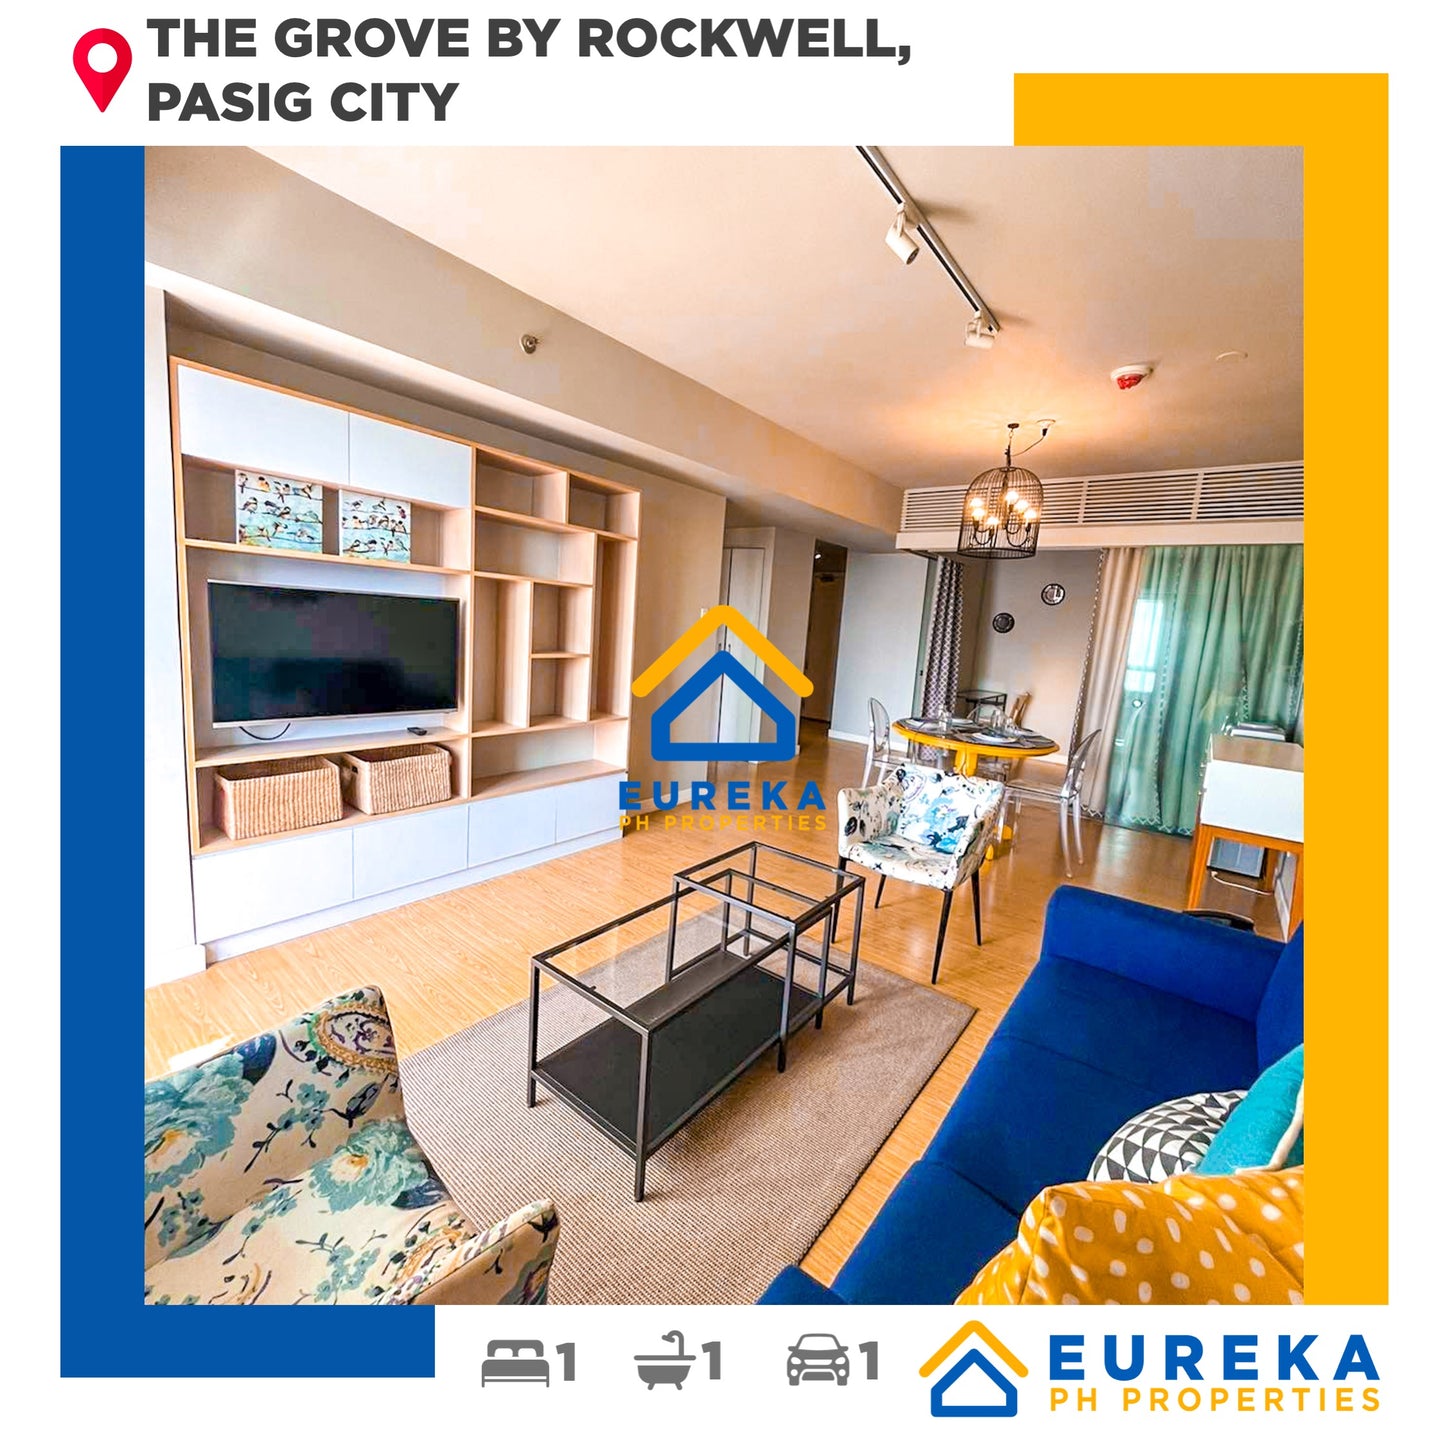 Fully furnished 68 sqm 1BR Flexi w/parking at Grove Rockwell, Pasig City.